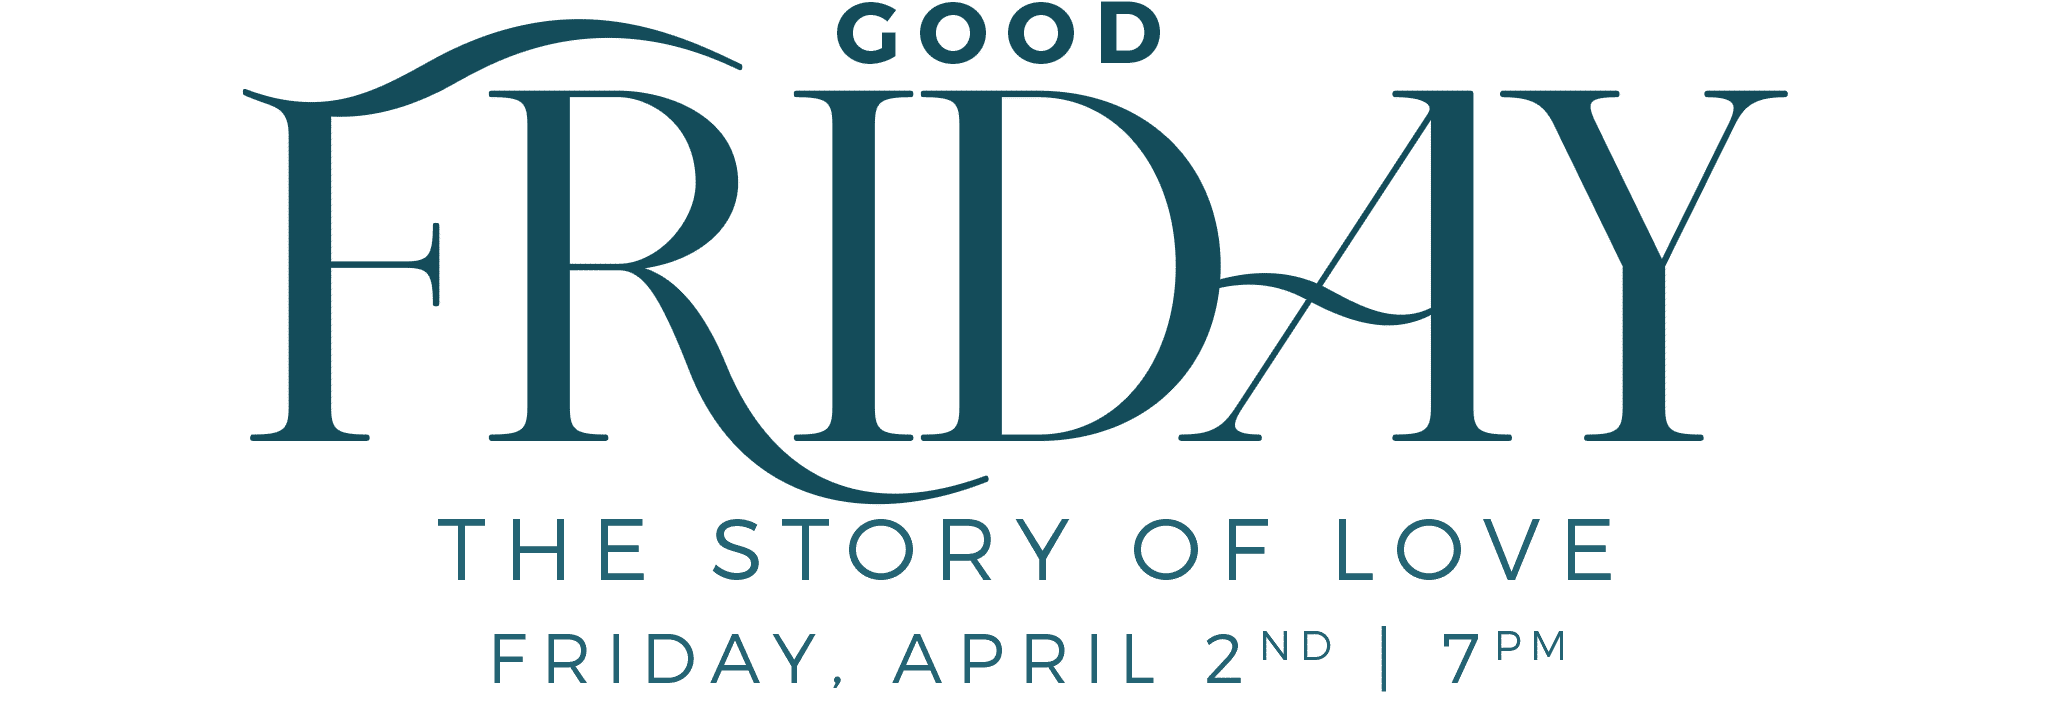 The Brooklyn Tabernacle Good Friday The Story of Love banner